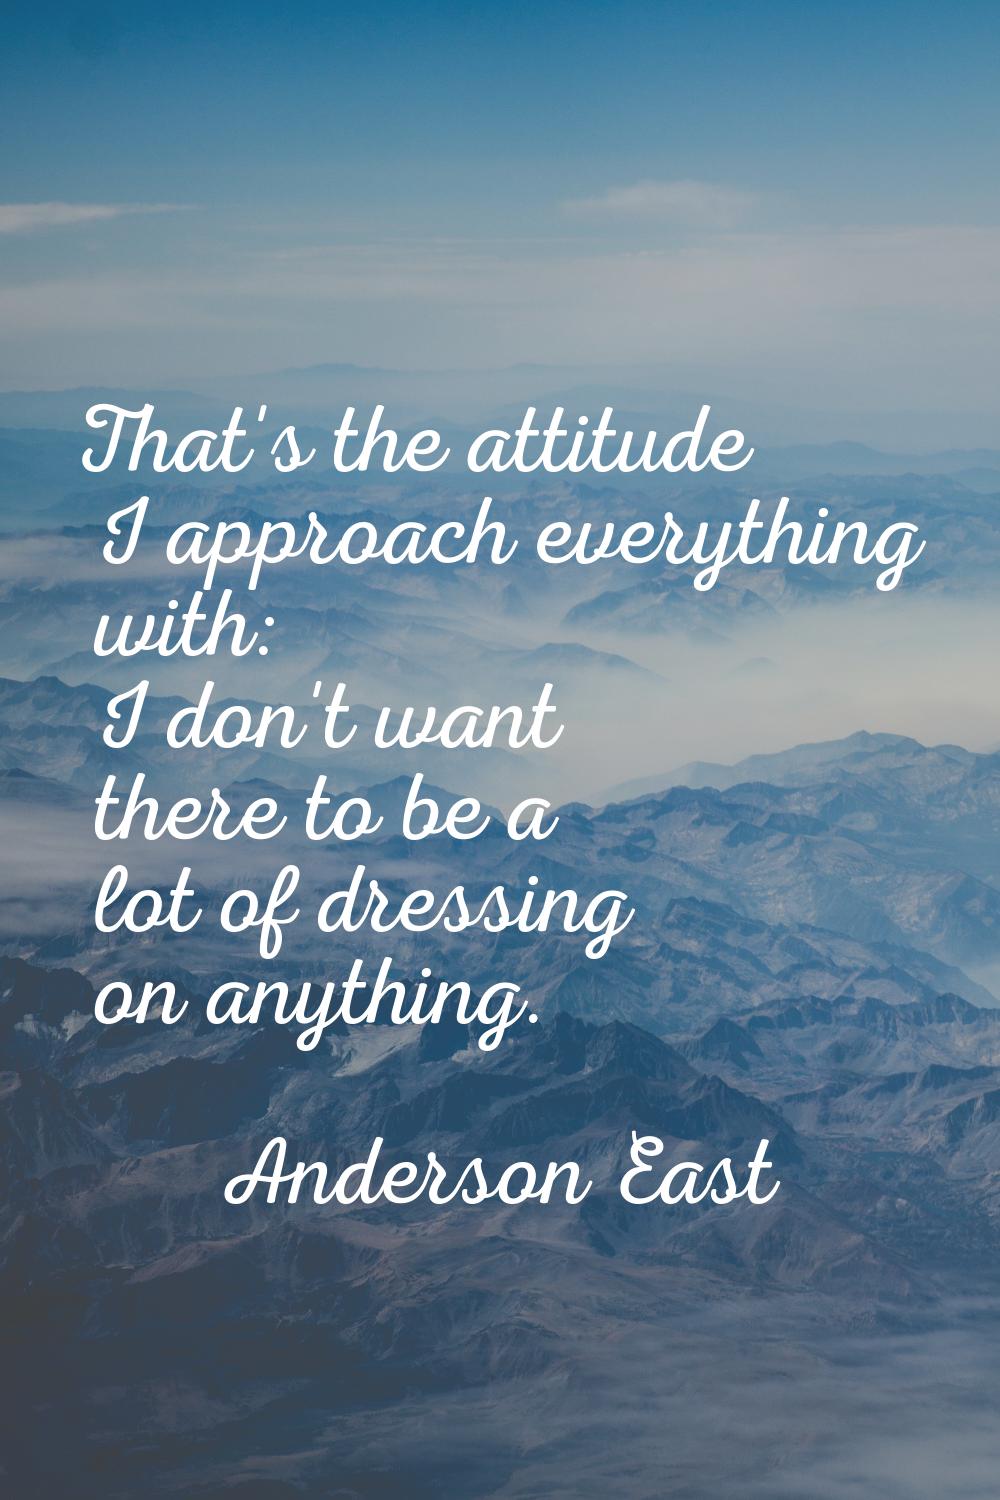 That's the attitude I approach everything with: I don't want there to be a lot of dressing on anyth